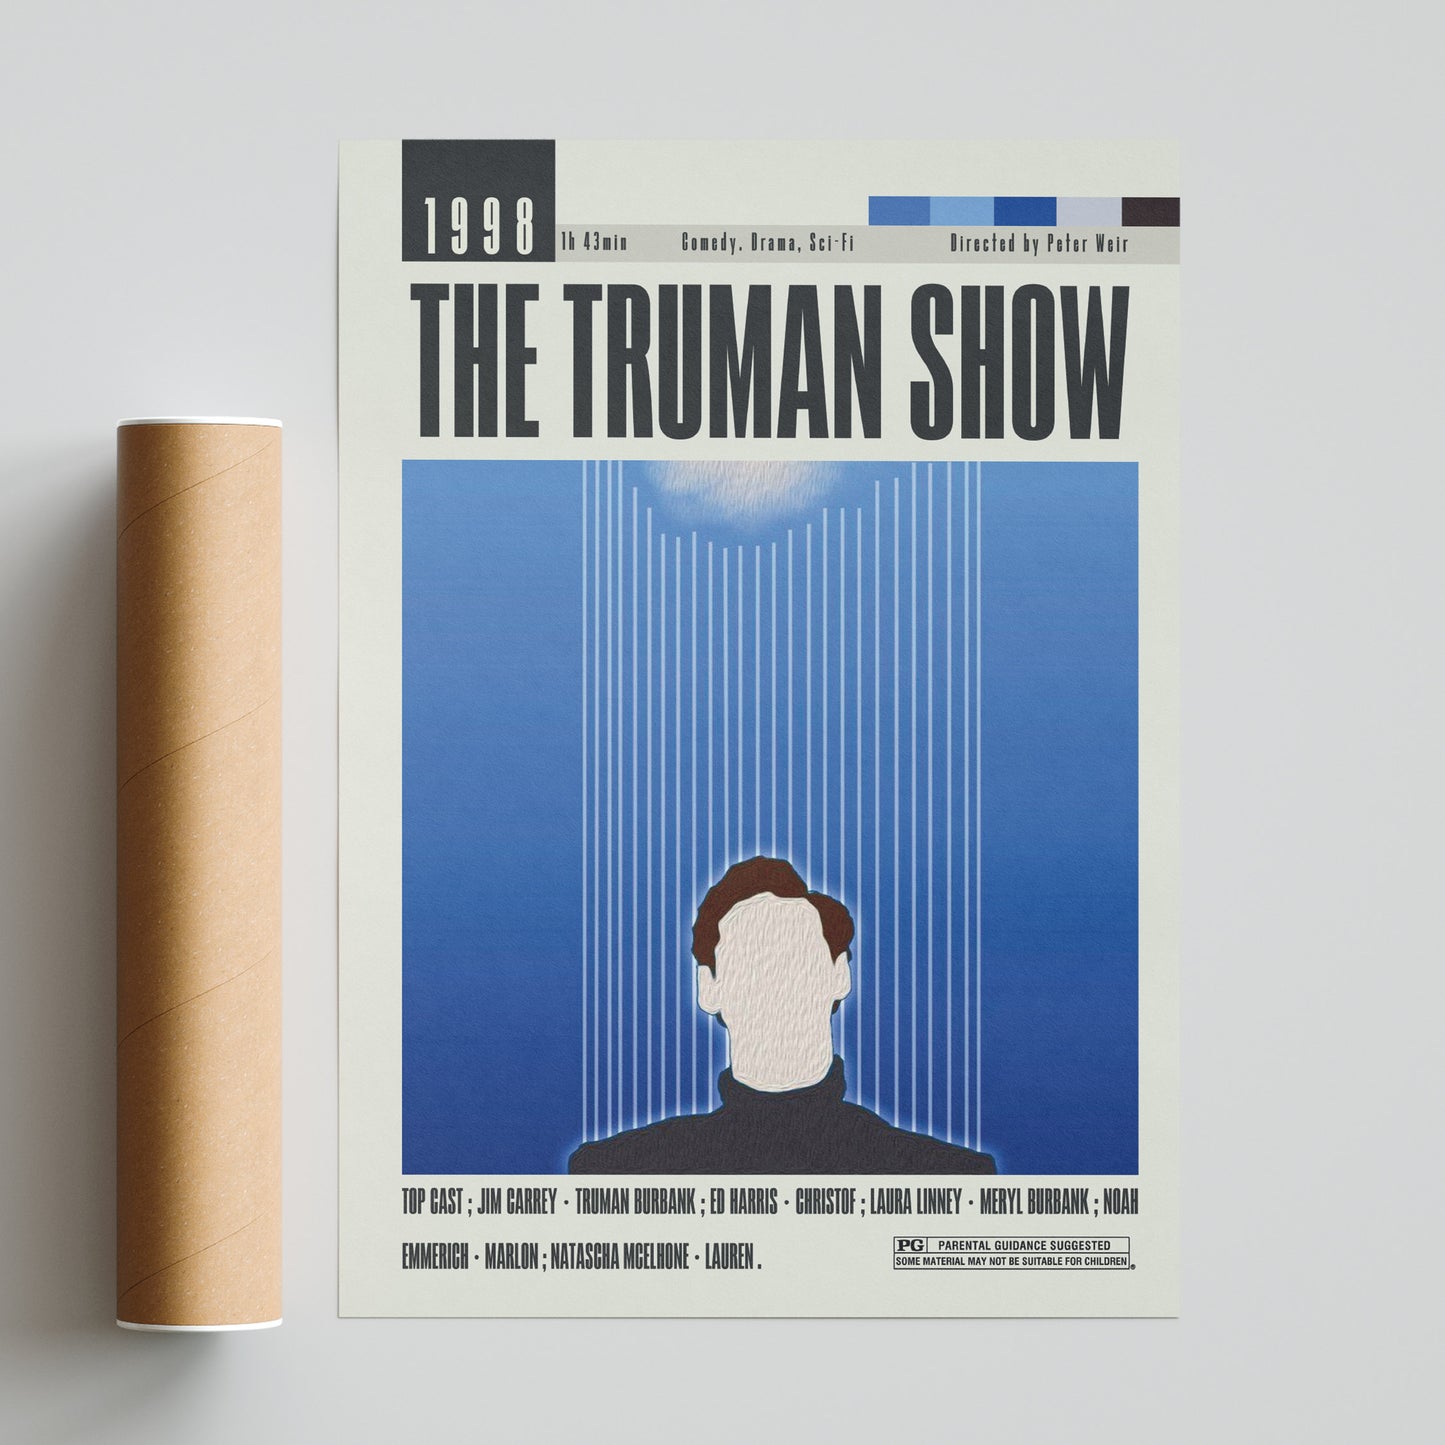 Discover the perfect addition to your movie collection with The Truman Show Poster. Featuring original, cheap, and vintage movie posters from Peter Weir's cinematic works, this customizable, minimalist wall art print brings a touch of retro style to any room. Complete your movie poster collection today!